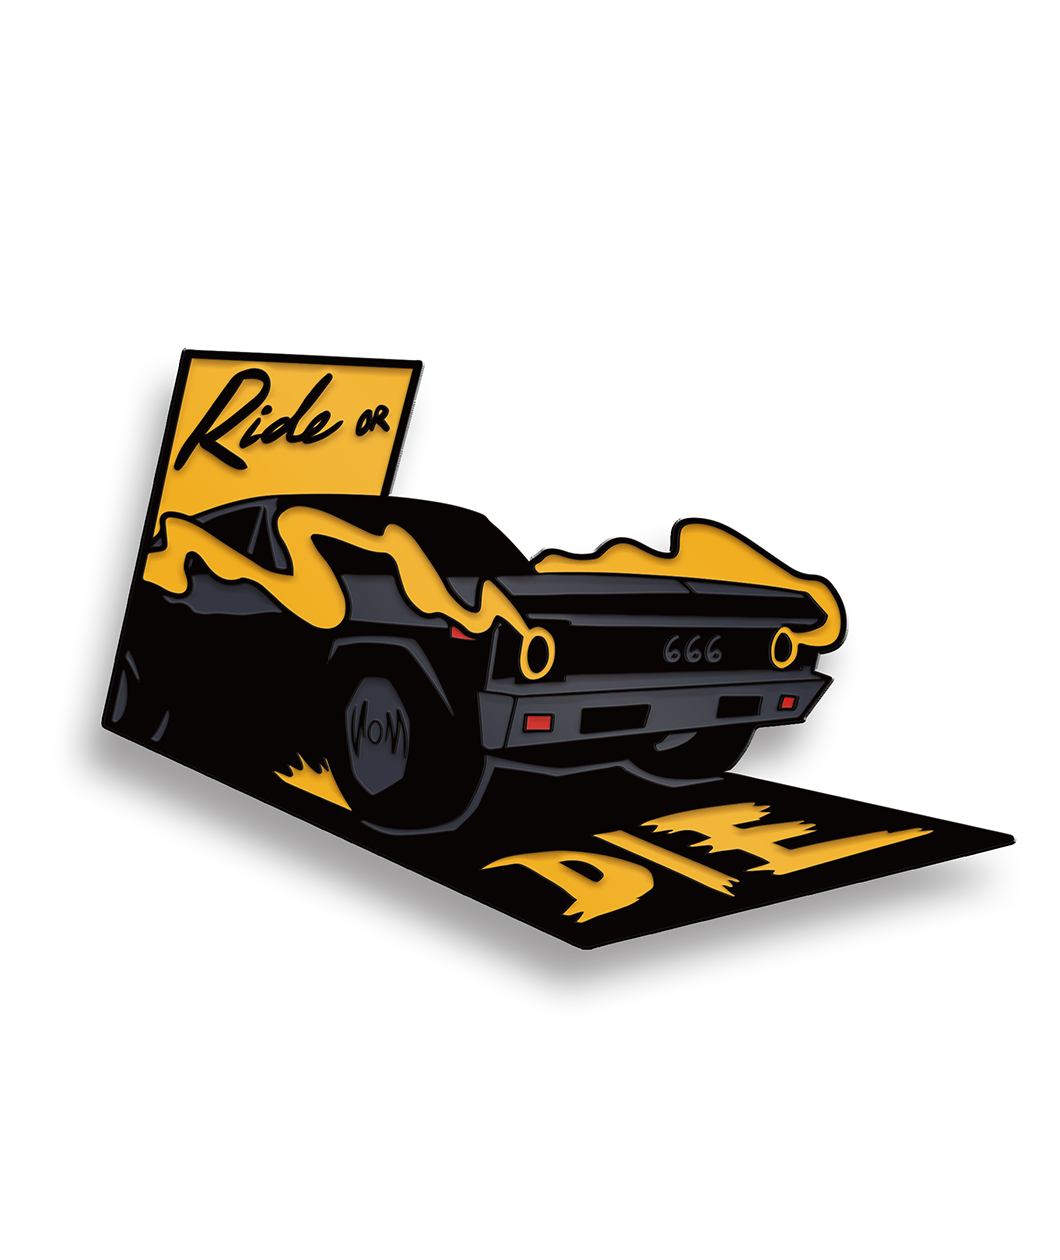 The Helix pin from Mars Heyward. The pin shows the back of a black car with yellow smoke coming out of the exhaust pipe and the numbers "666" on the tail end of the car. Above the car it says "Ride or" and on the ground behind the car, it says "Die". 